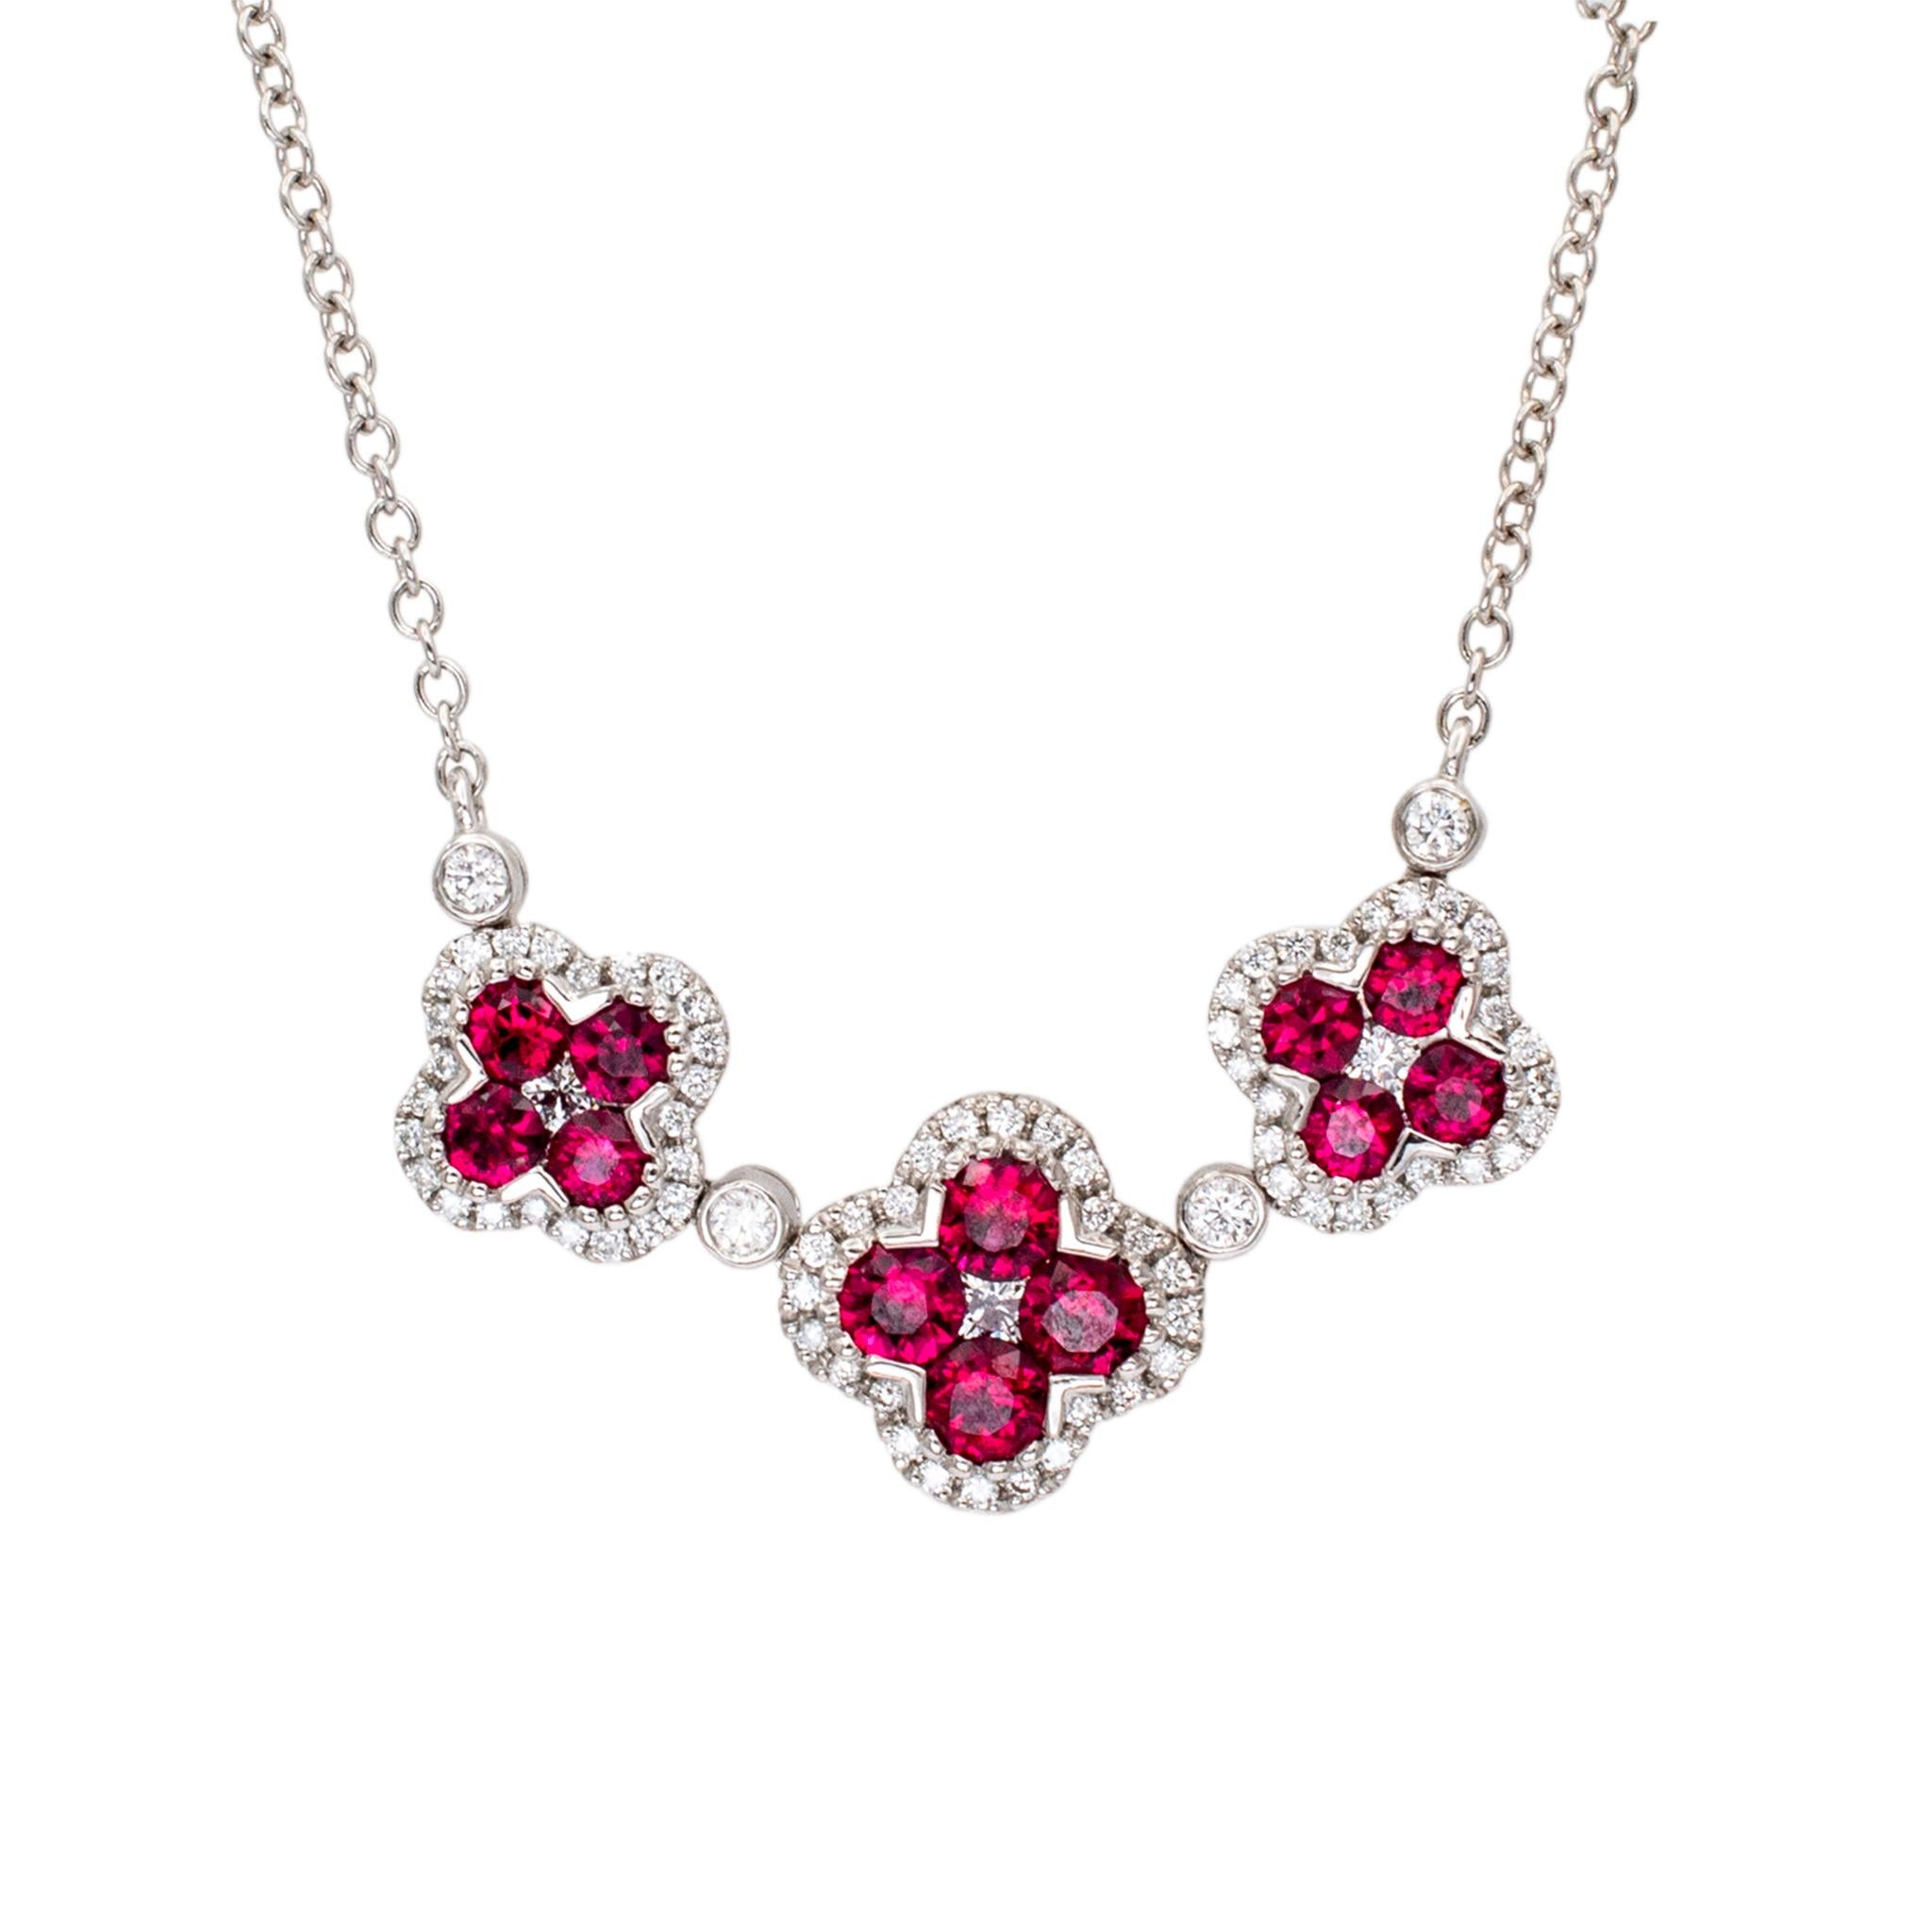 Gender: Ladies

Metal Type: 18K White Gold

Length: 16.00 Inches

Chain Width: 1.30 mm

Largest Flower Measurement: 9.80mm x 9.80mm

Weight: 4.50 grams

Ladies 18K white gold single strand collar diamond and ruby necklace. The metal was tested and